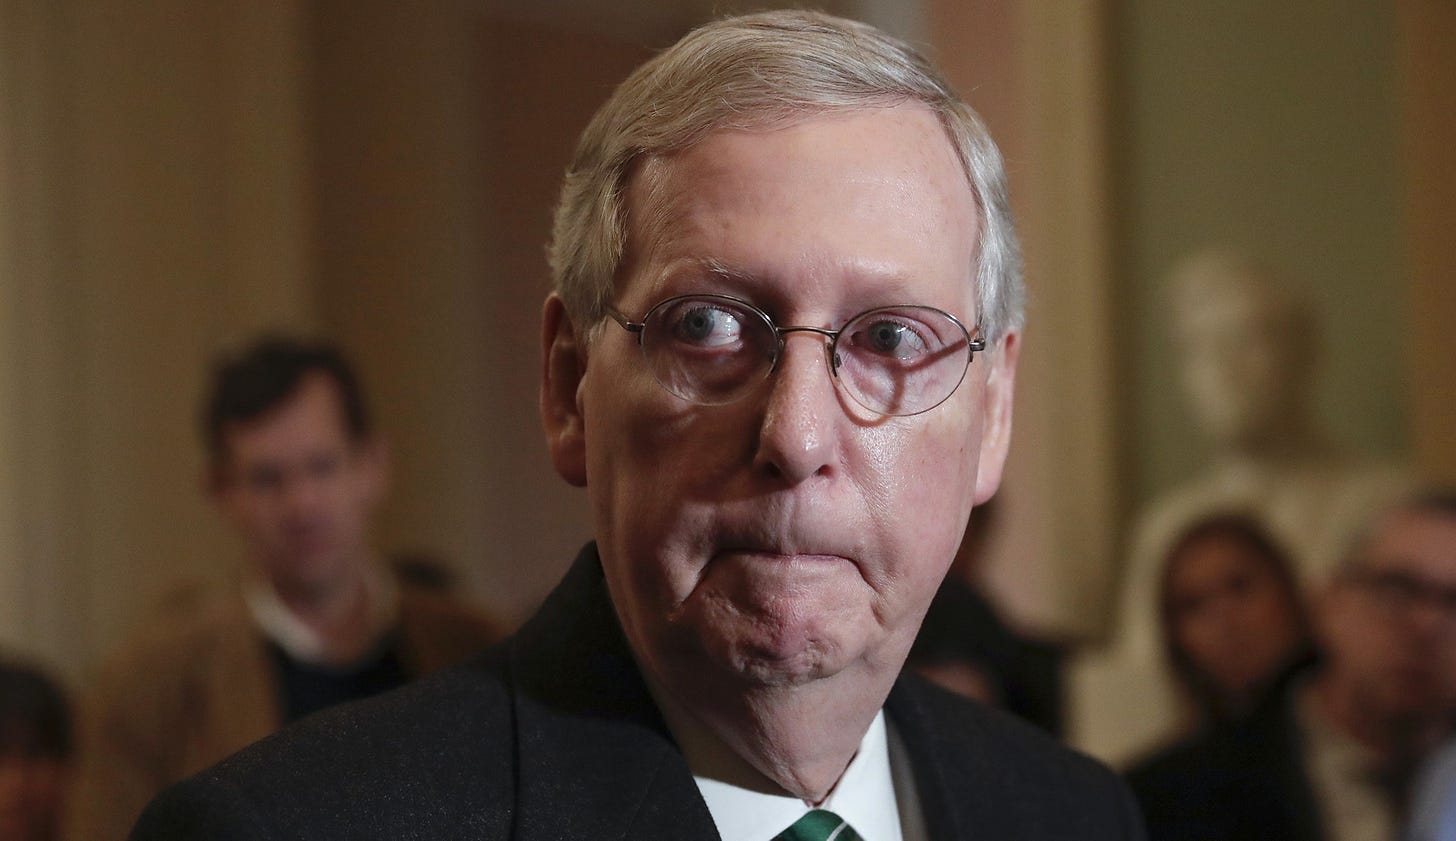 Could someone photoshop Mitch McConnell onto Gollum from Lord of the Rings?  : r/PhotoshopRequest